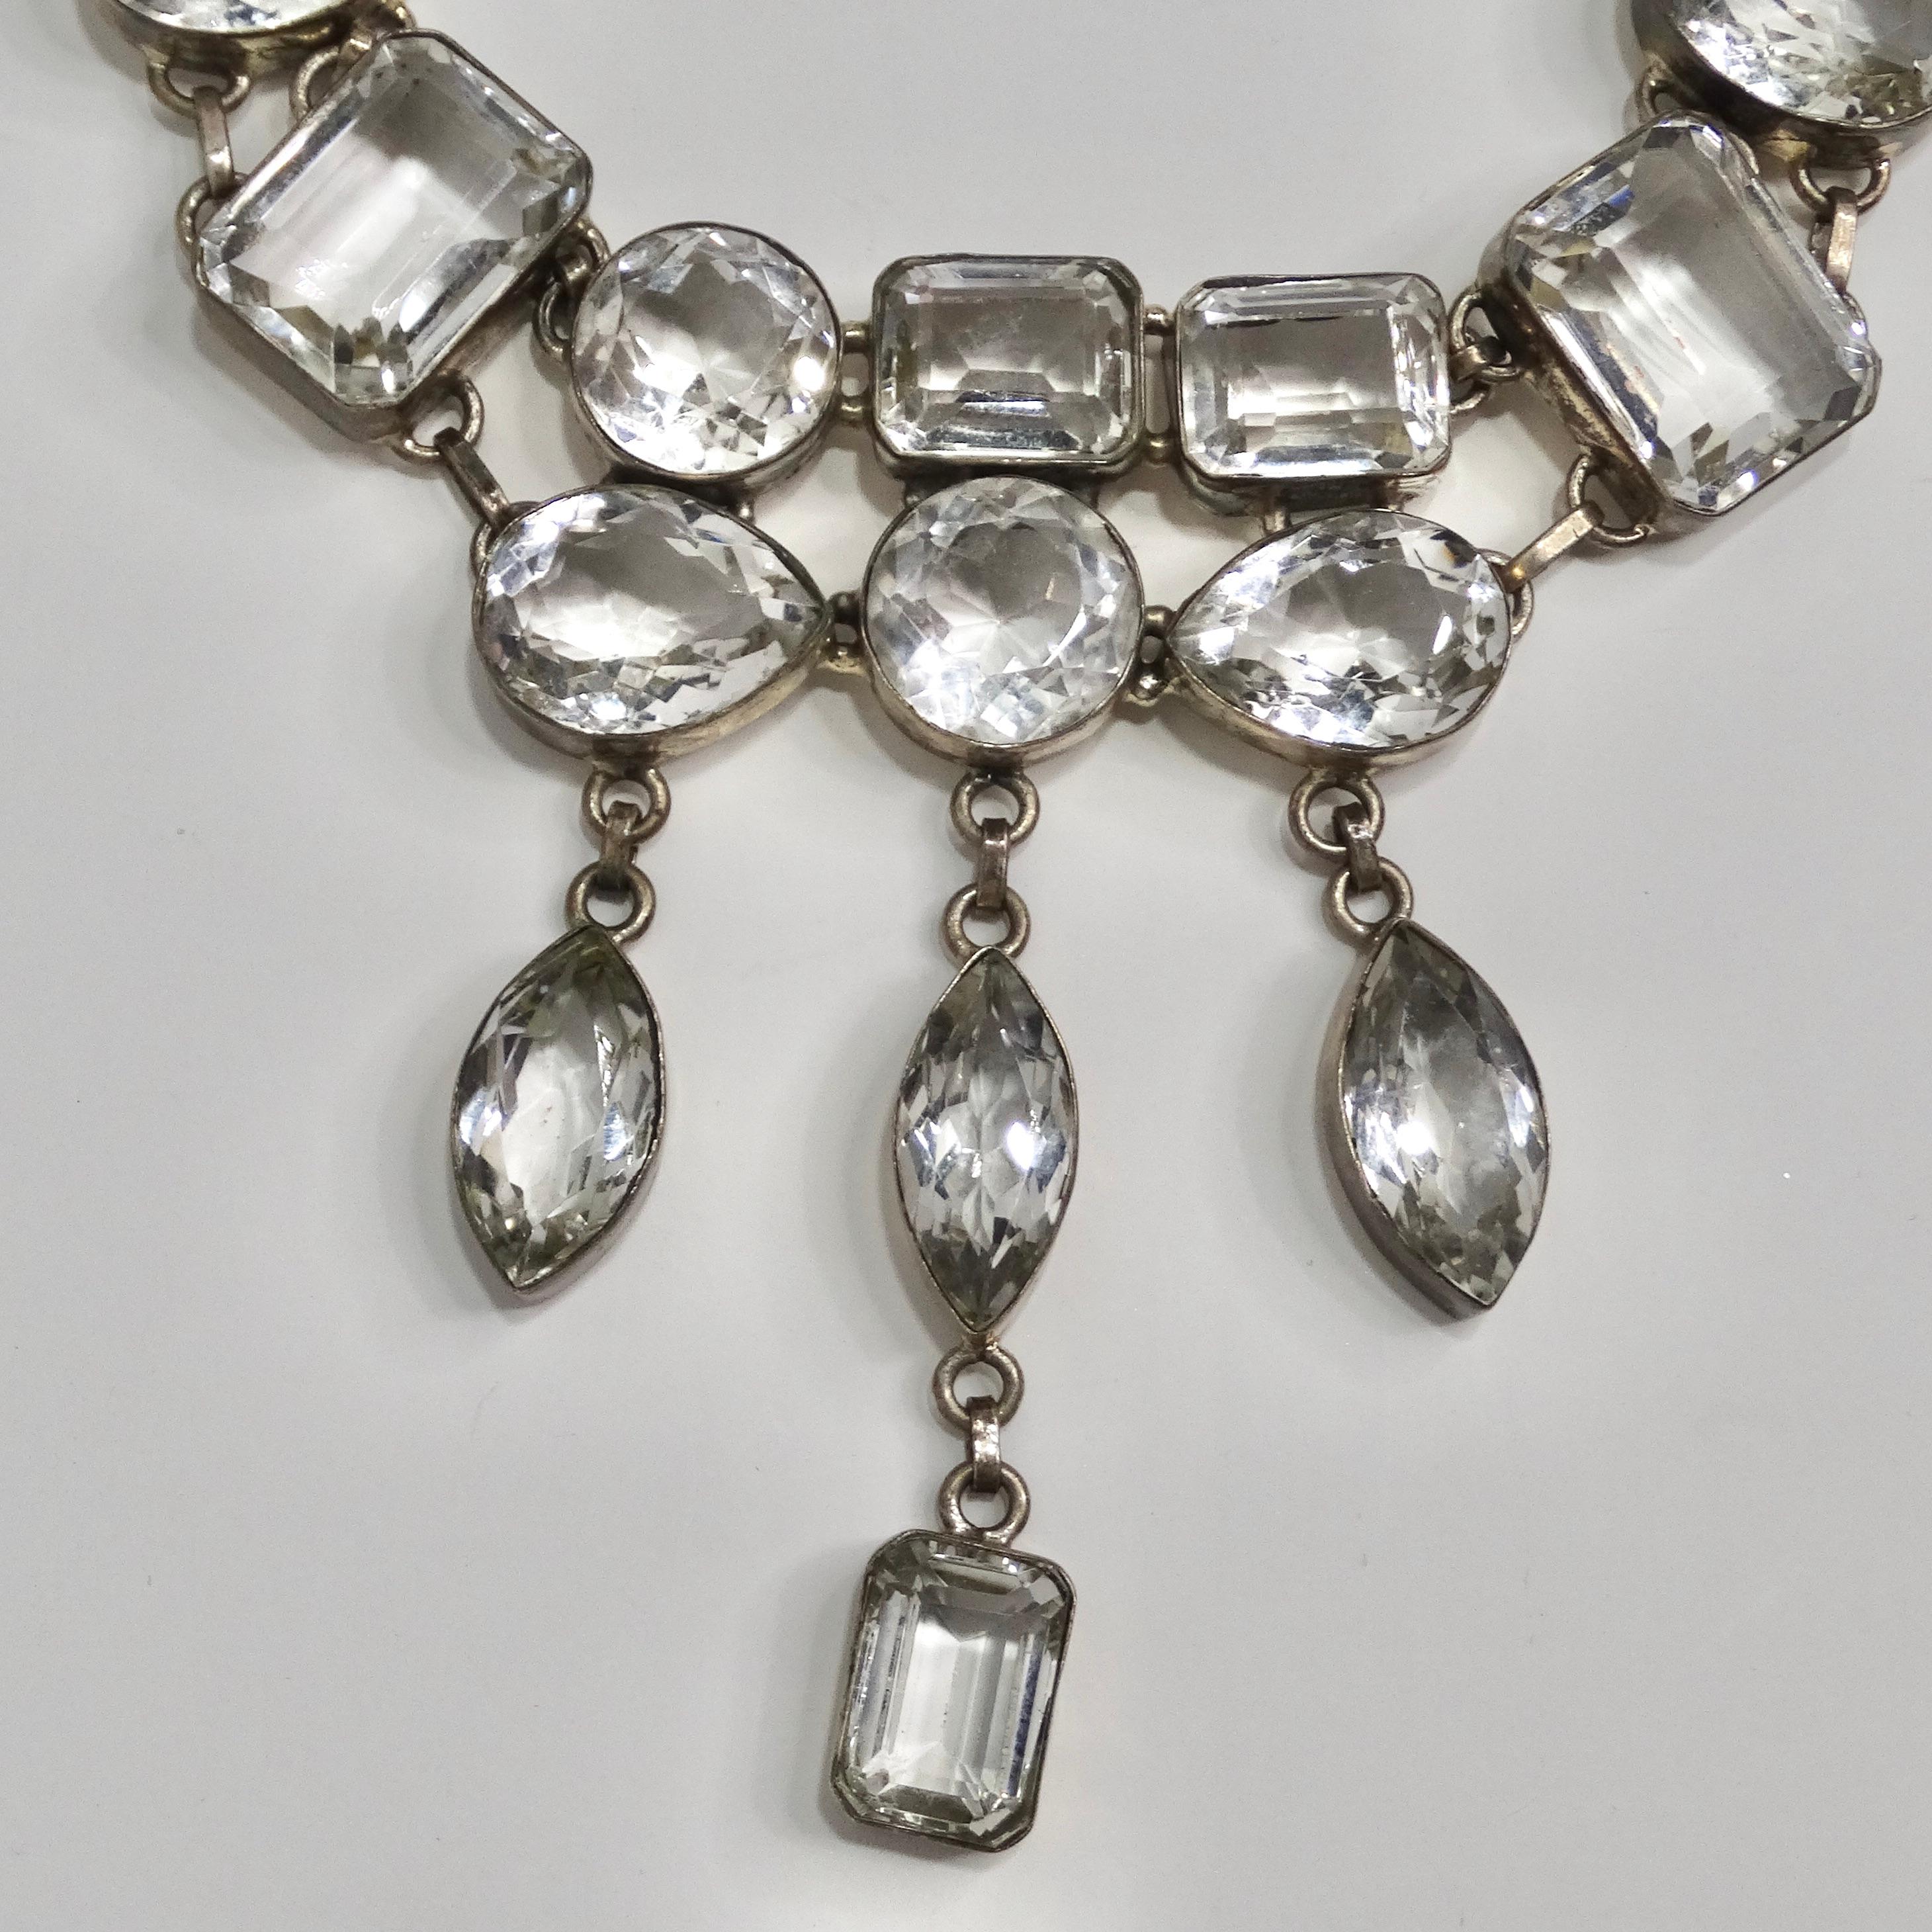 Elevate your style with this mesmerizing statement necklace that encapsulates the essence of the 1990s. Crafted with exquisite attention to detail, this necklace showcases an arrangement of large, clear crystals encased in silver settings. What